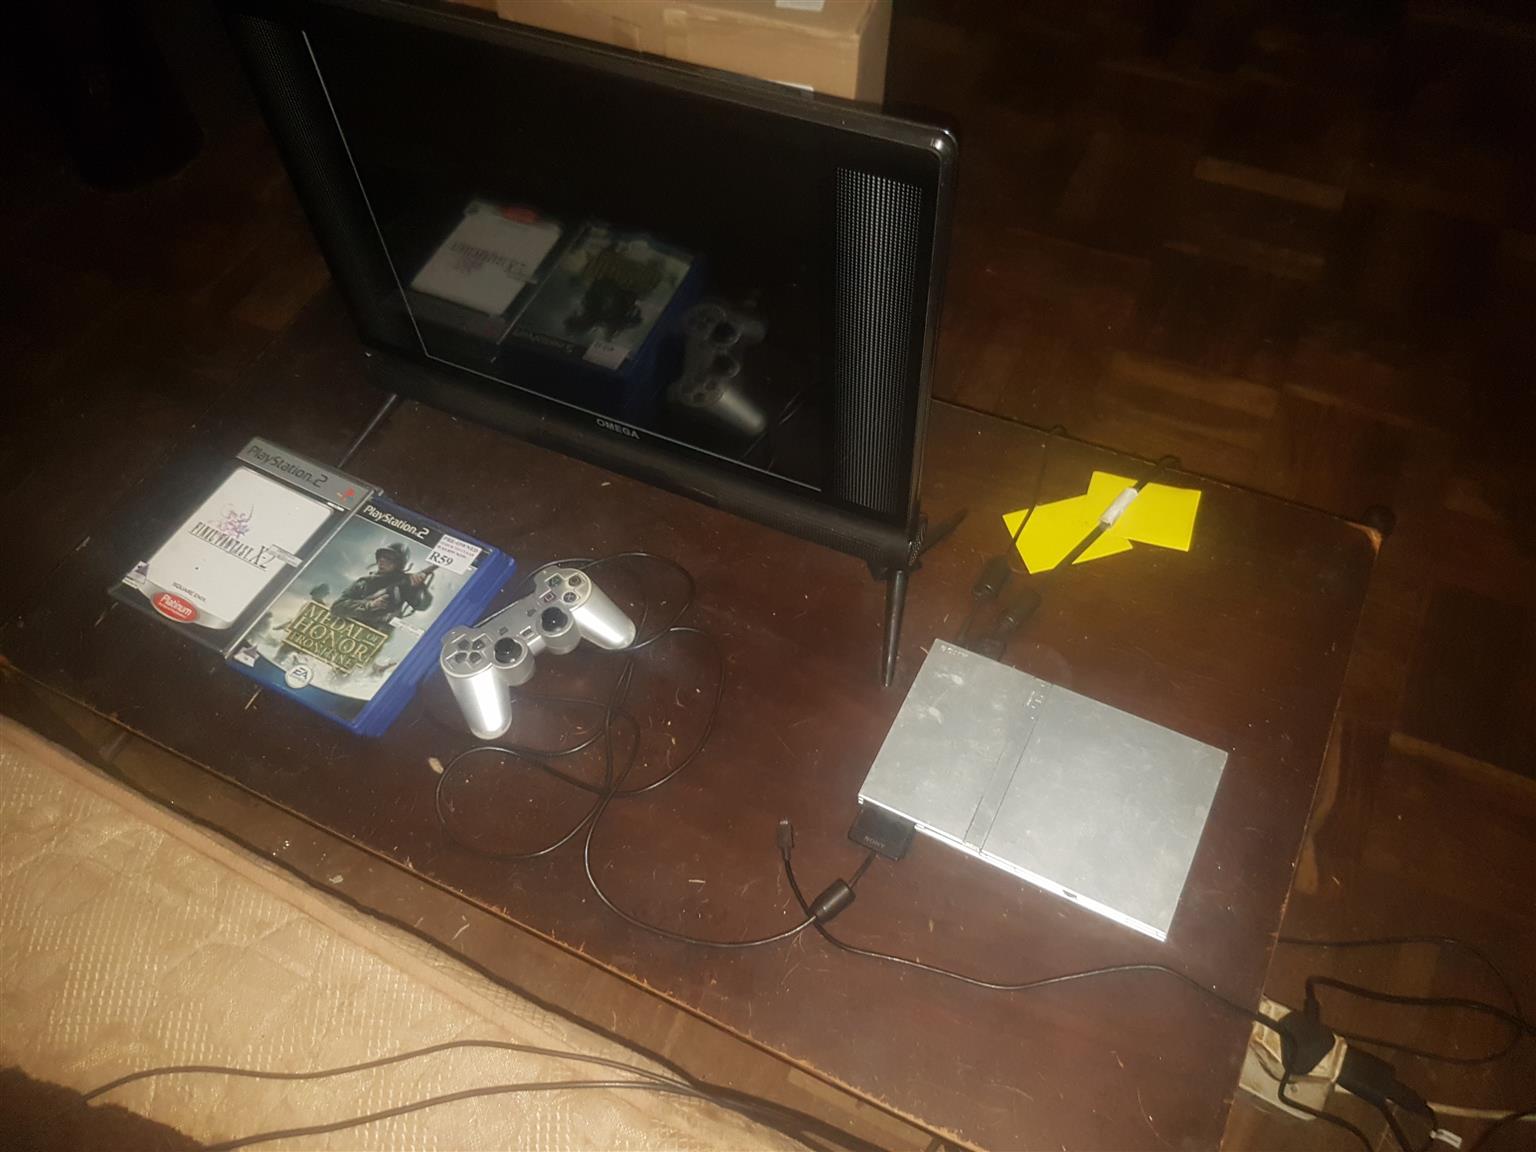 Playstation 2 and TV with games for sale